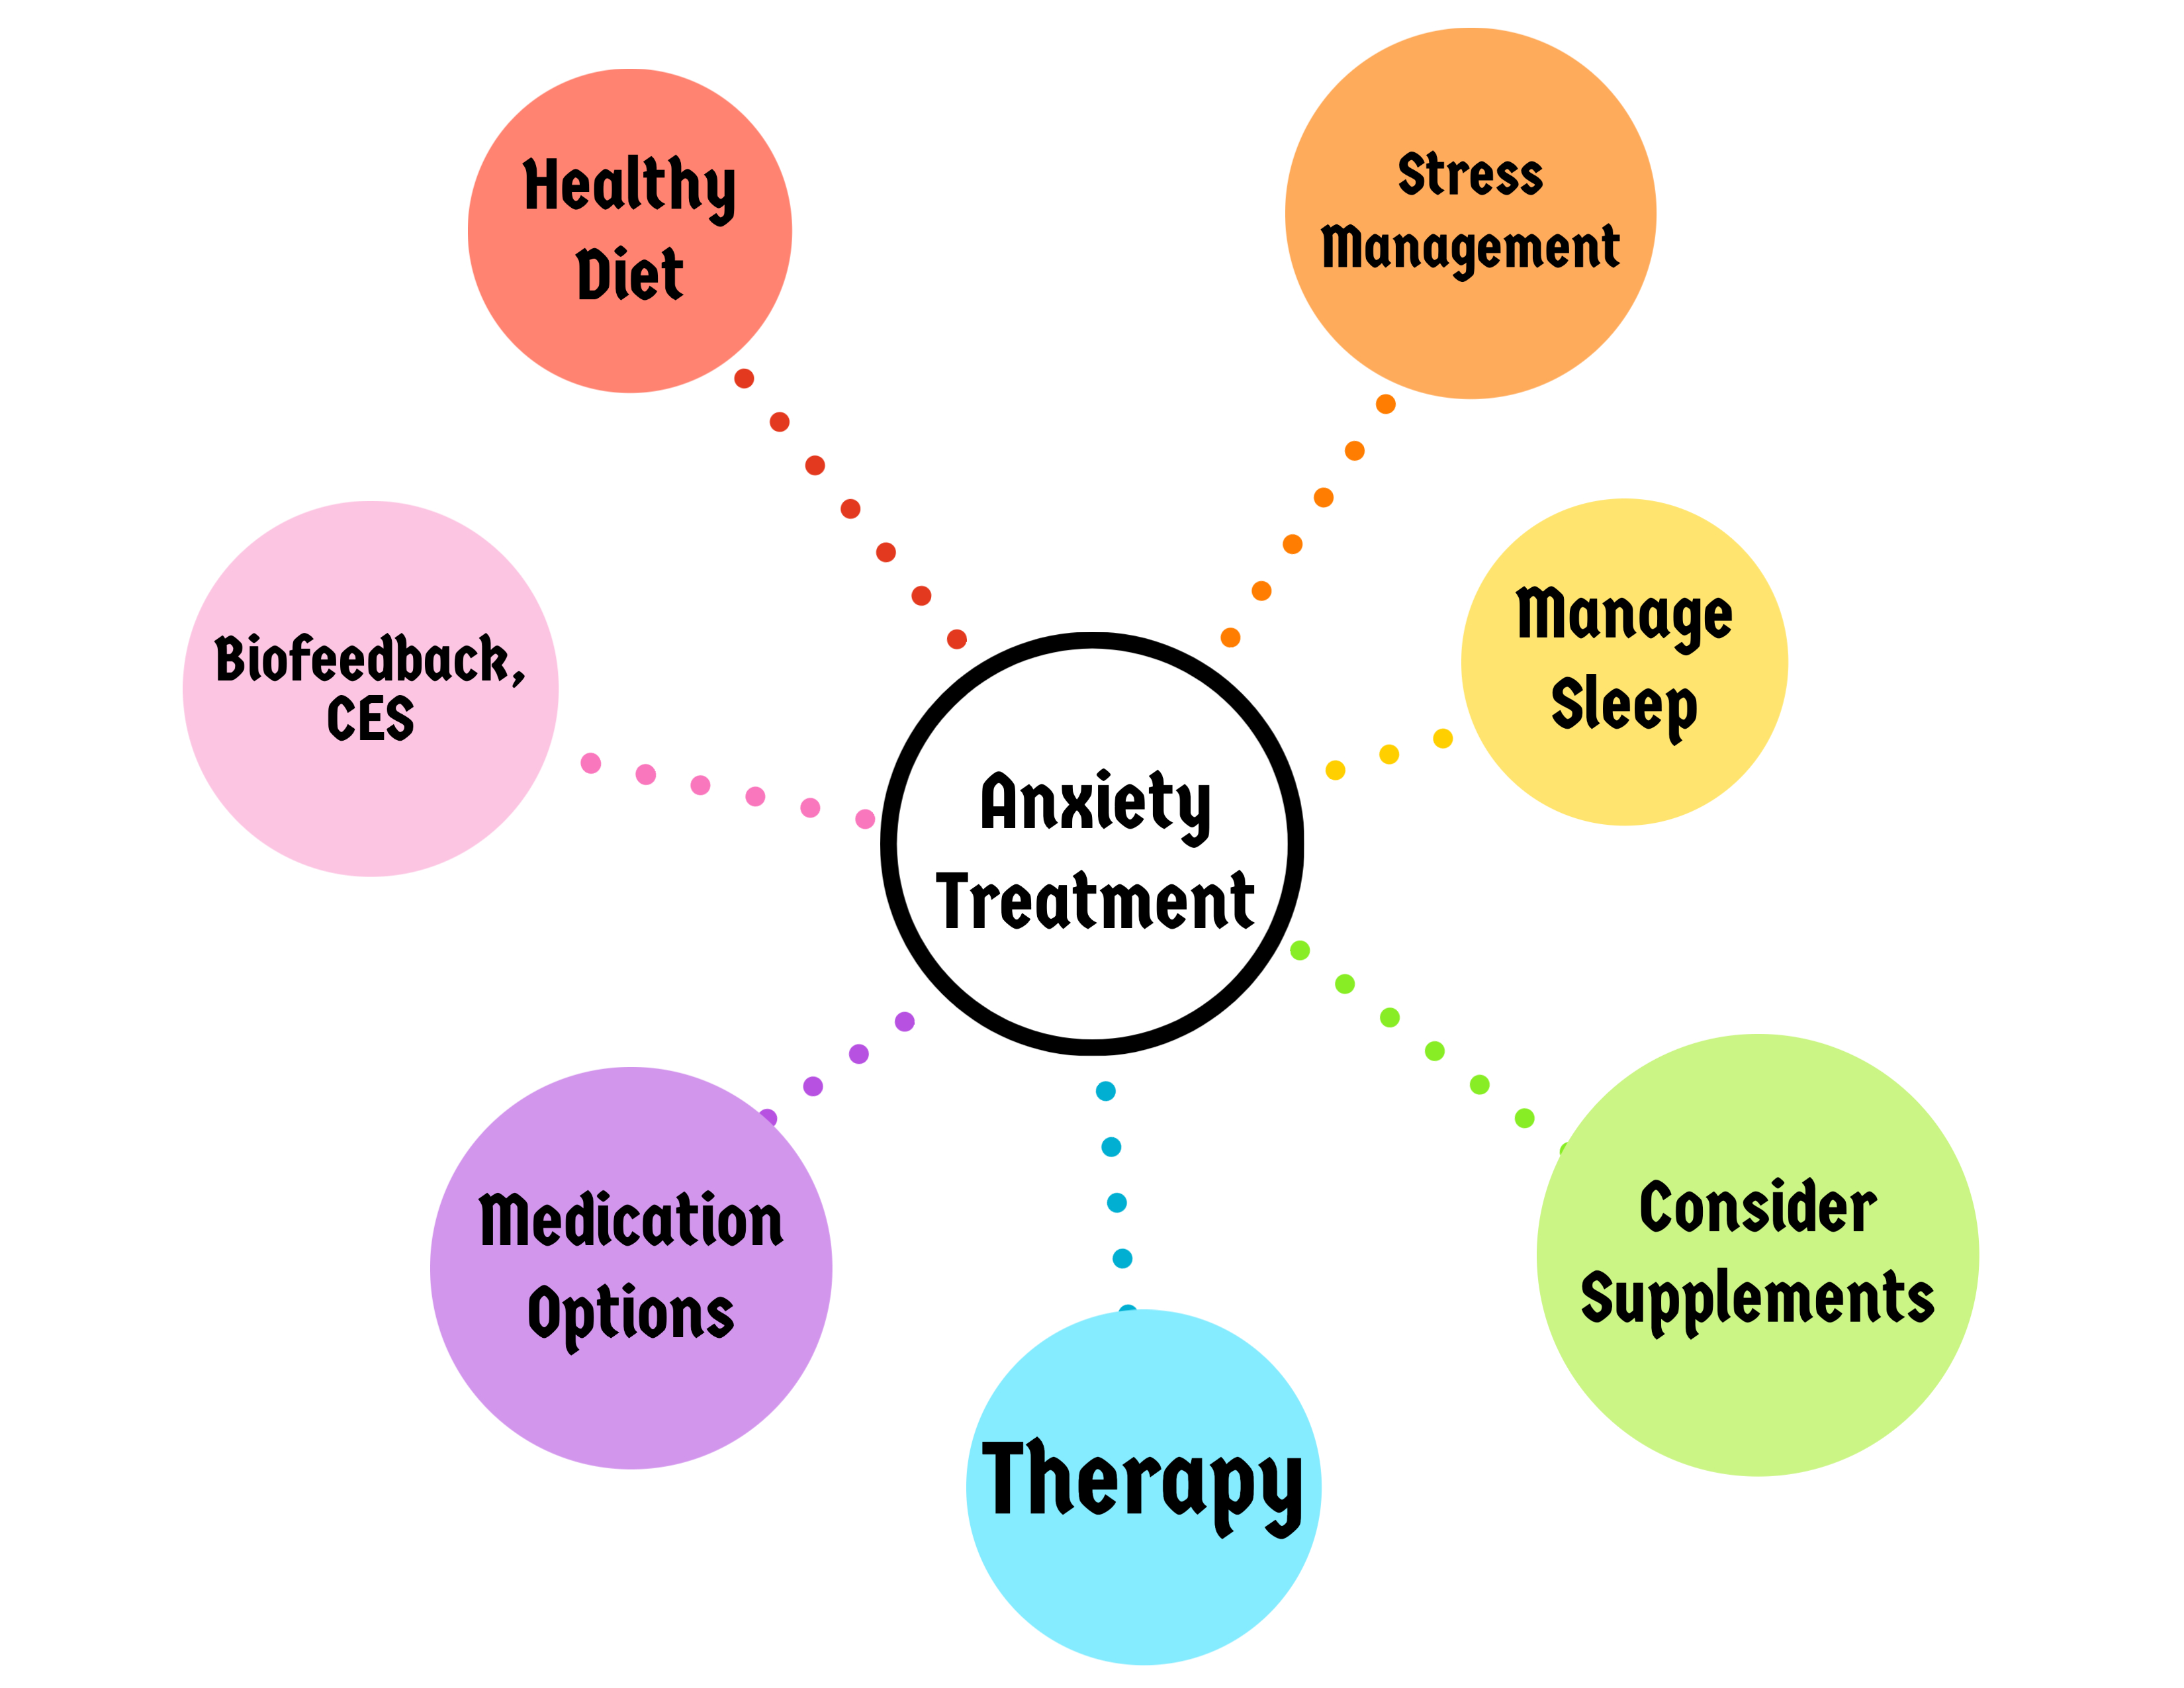 Treat Anxiety with Holistic Options